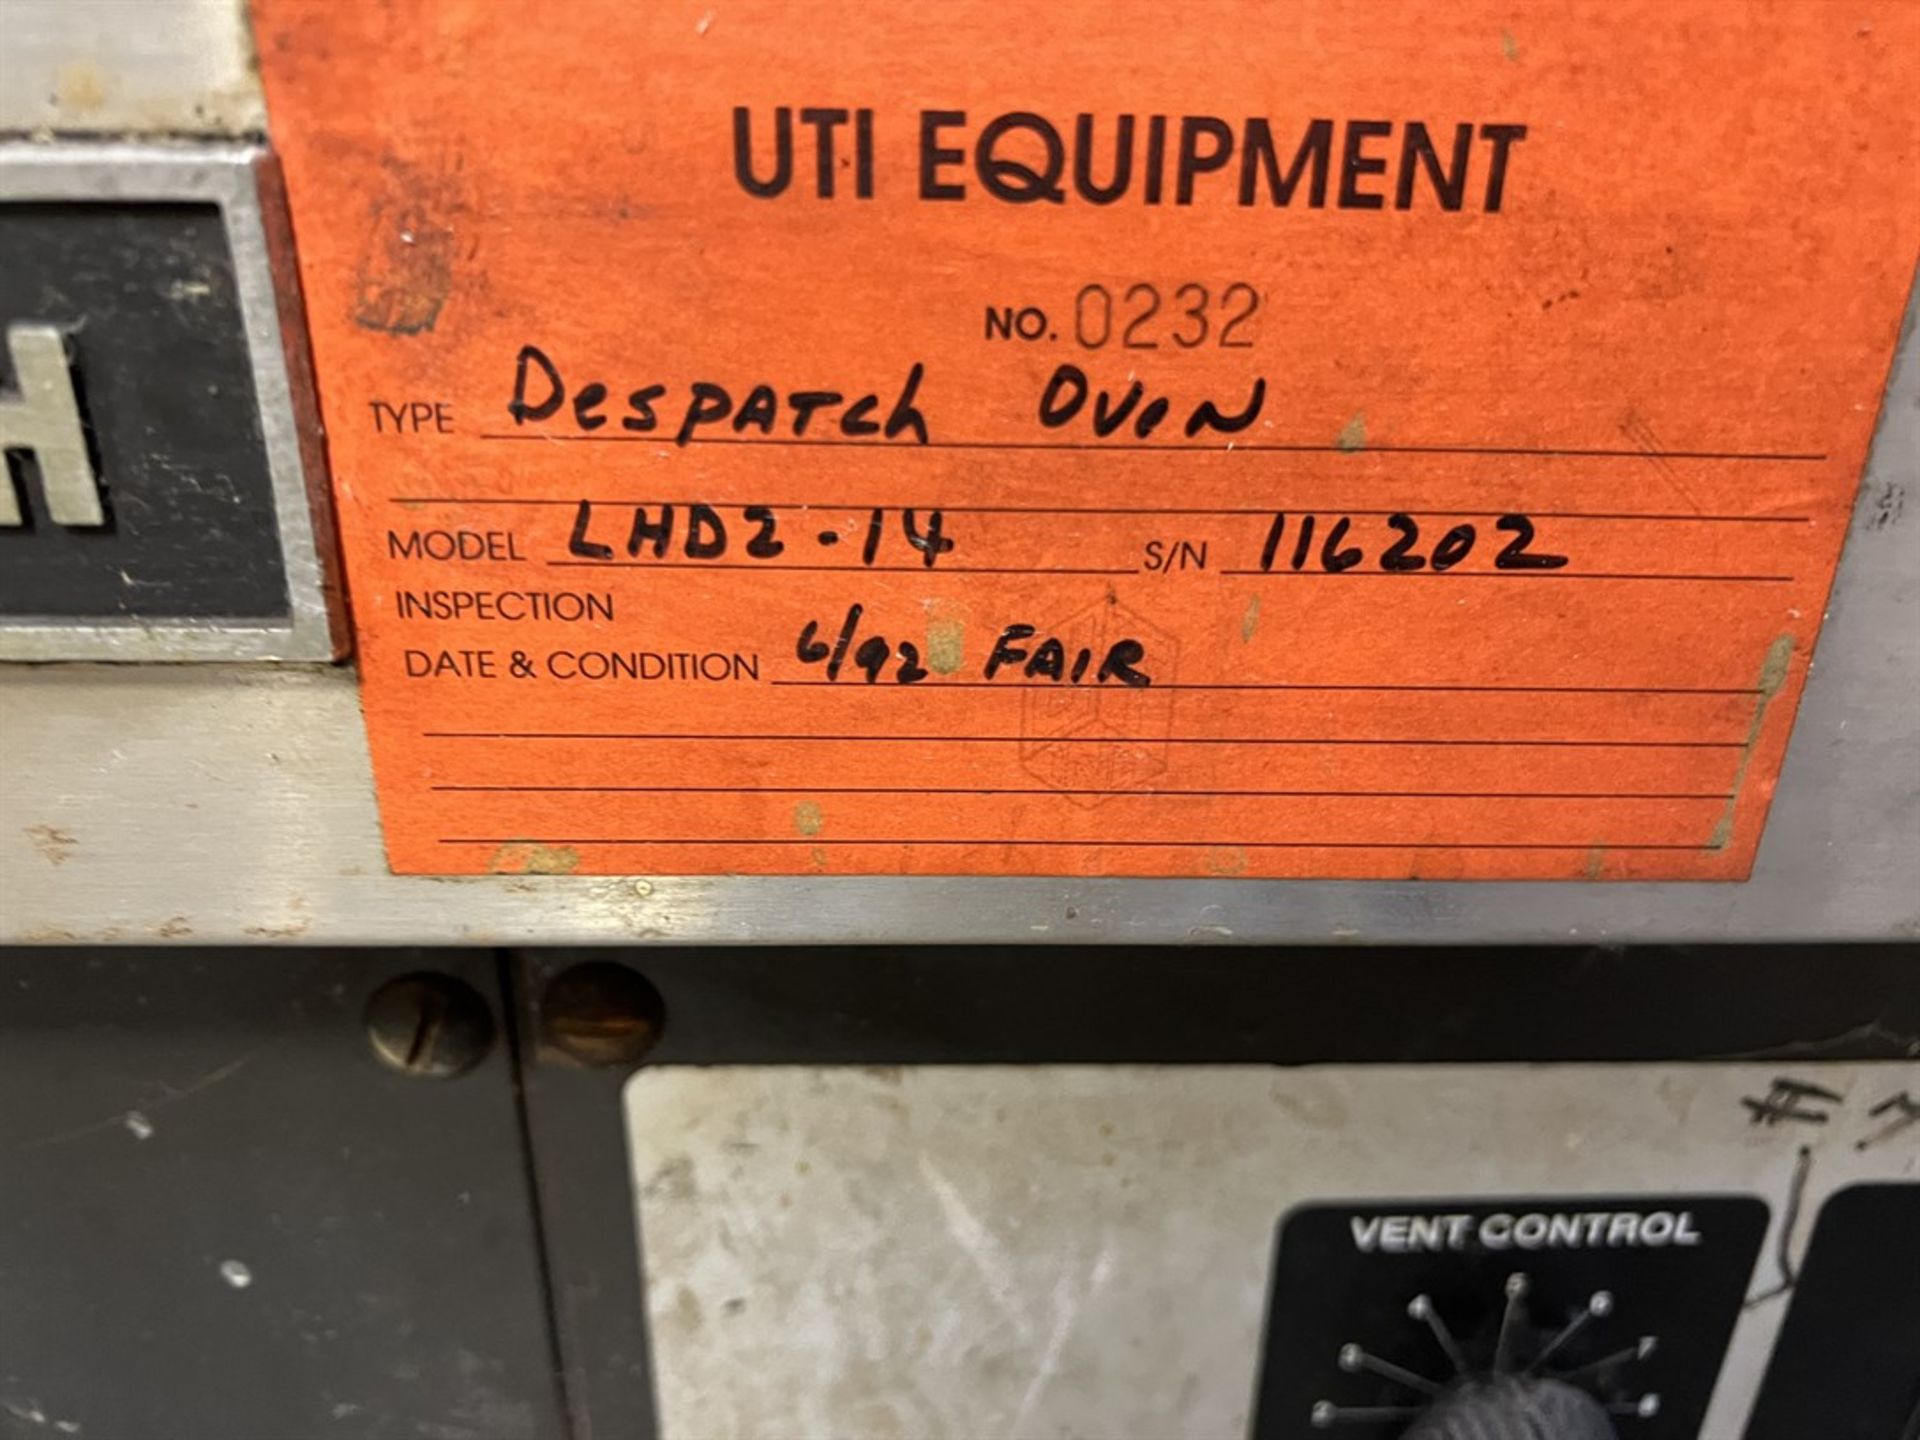 DESPATCH LHD2-14 Oven, s/n 116202 (Wing Shop) - Image 6 of 8